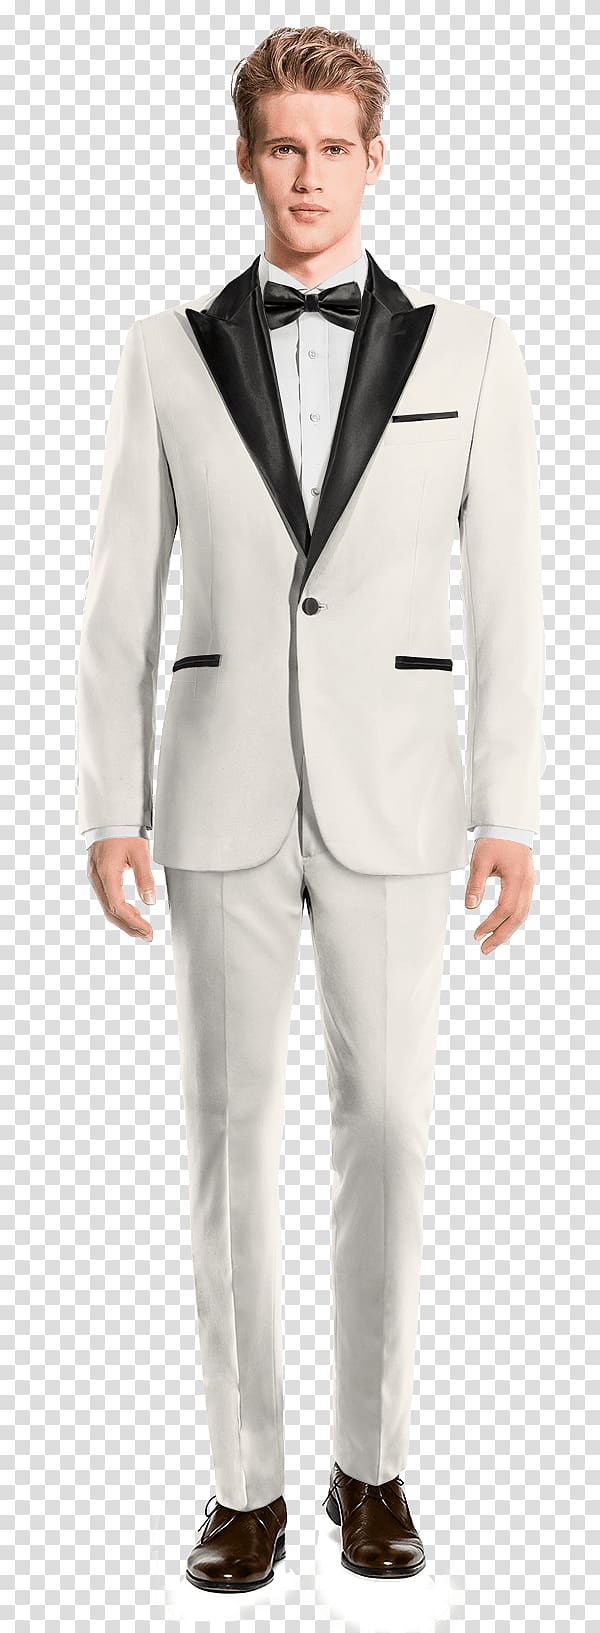 Mao suit Tuxedo Double-breasted Jacket, suit transparent background PNG clipart